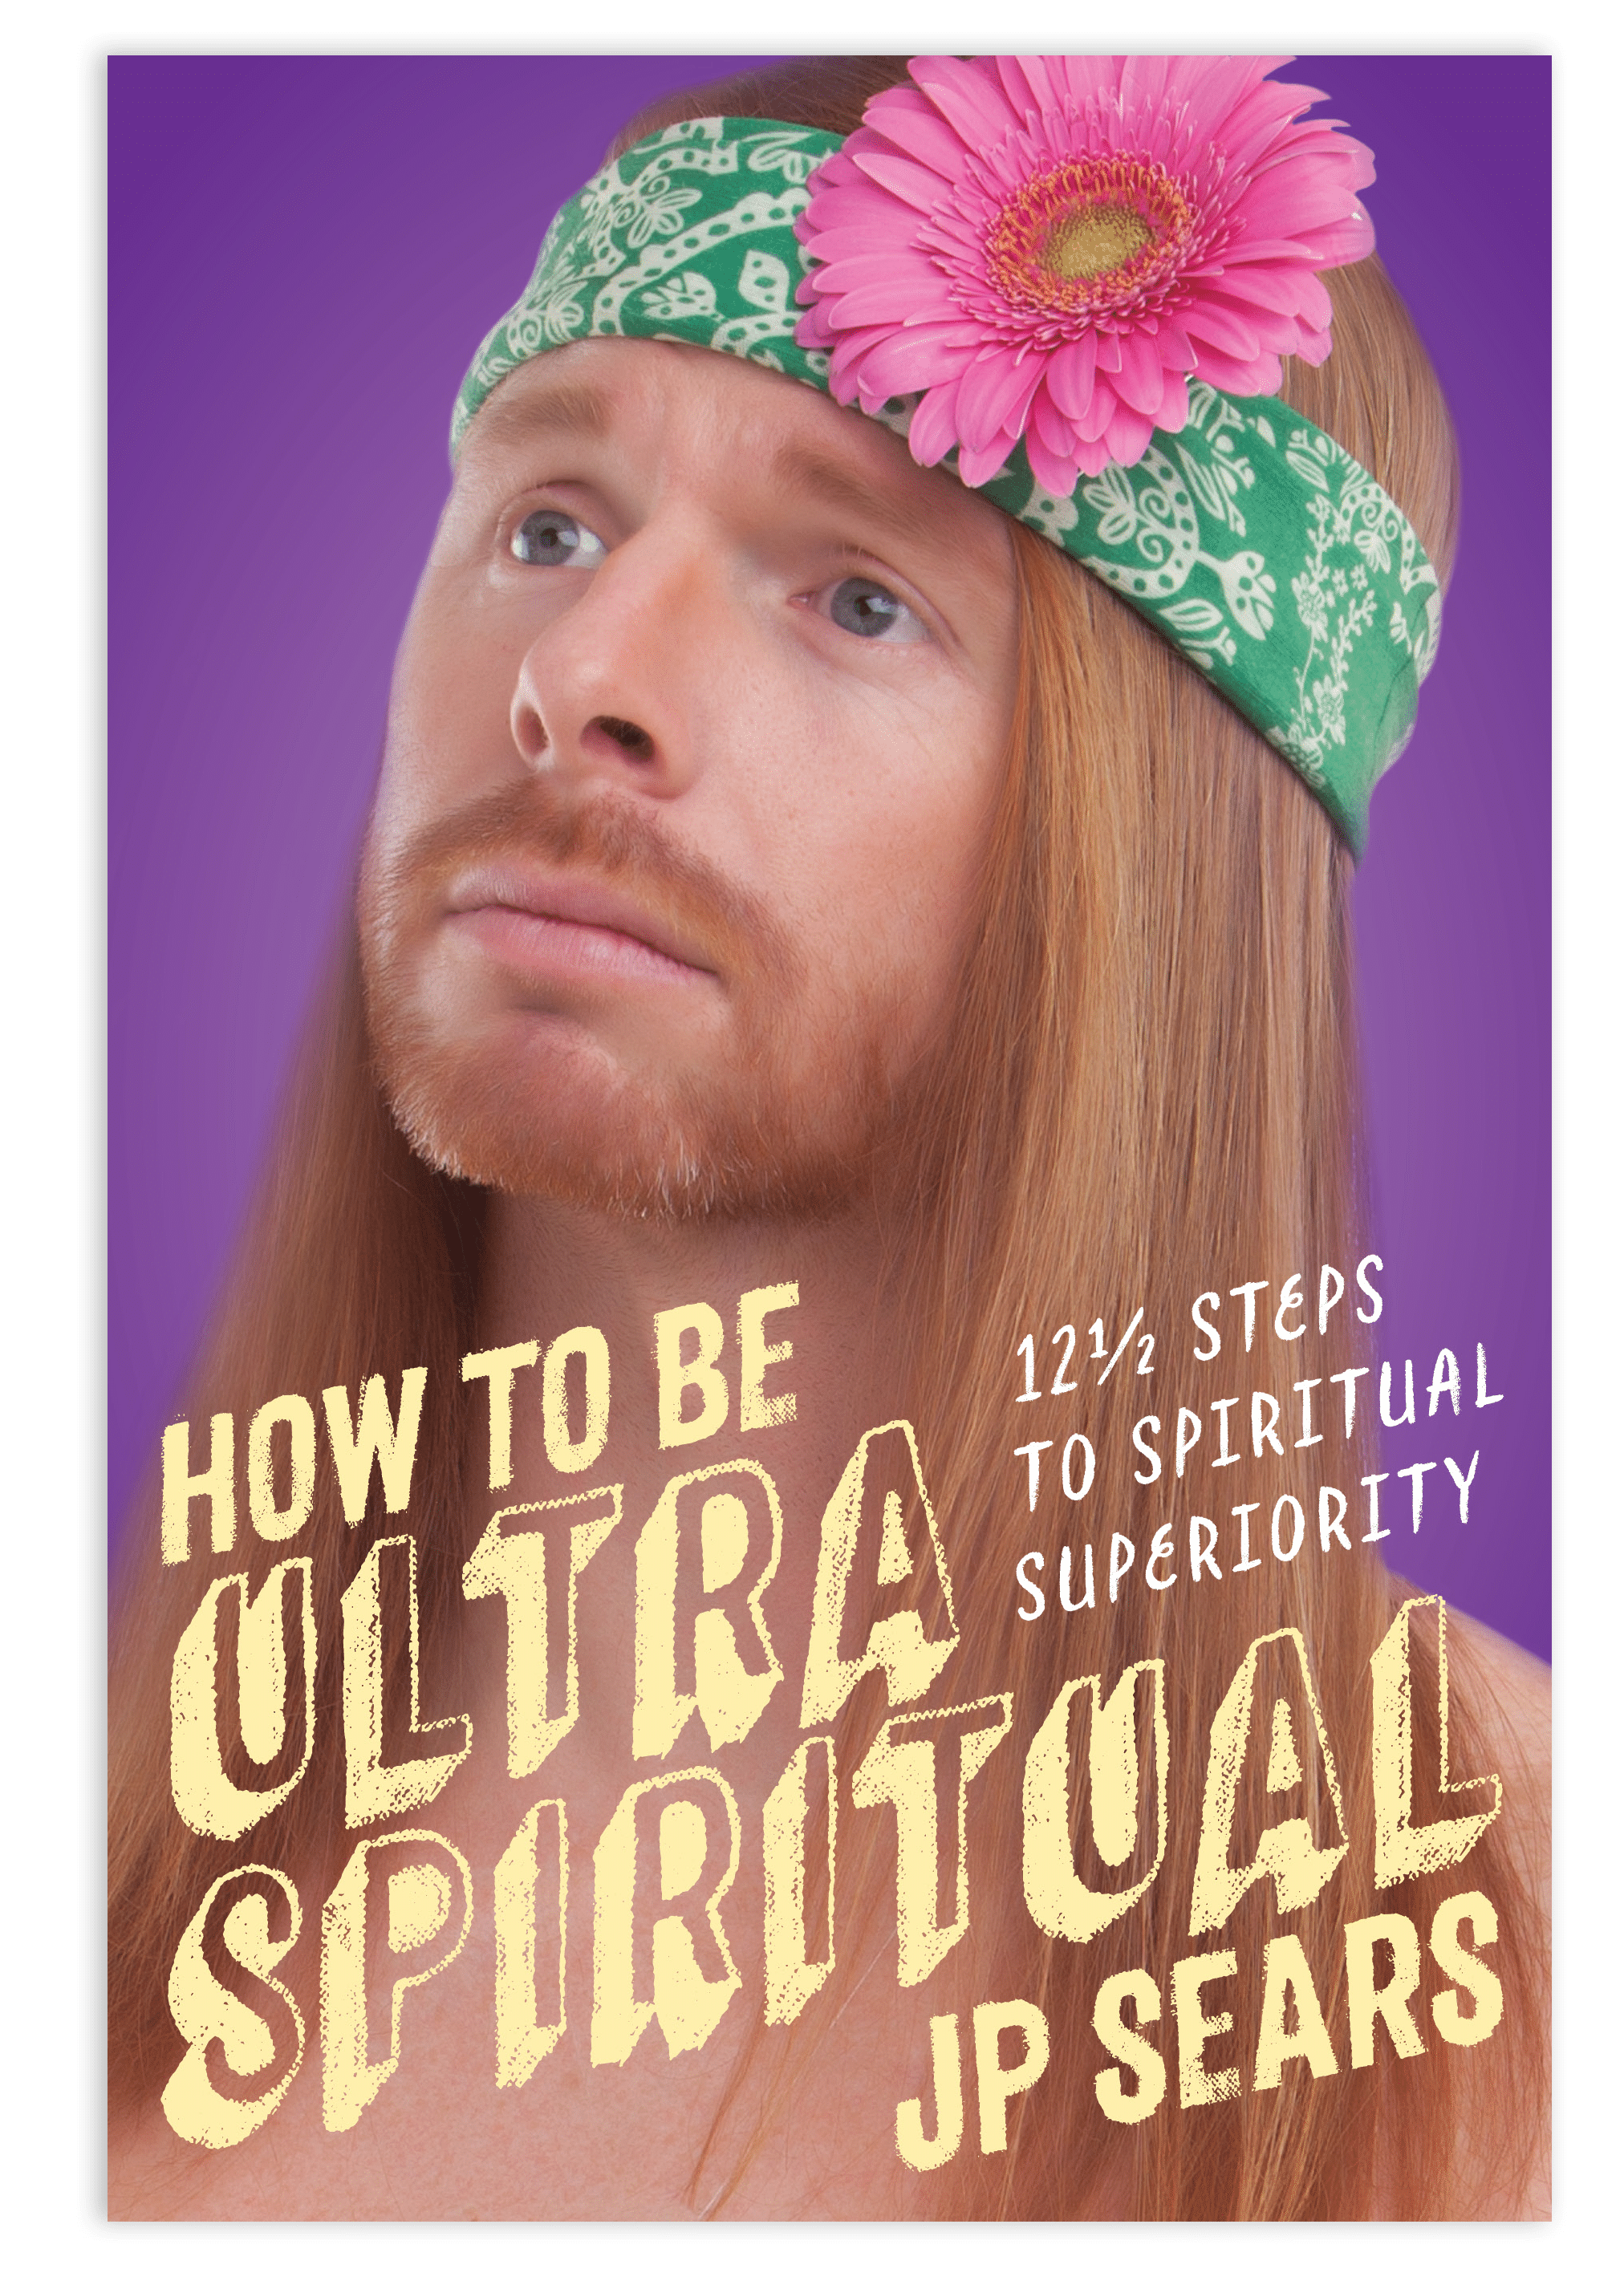 How to be Ultra Spiritual with JP Sears